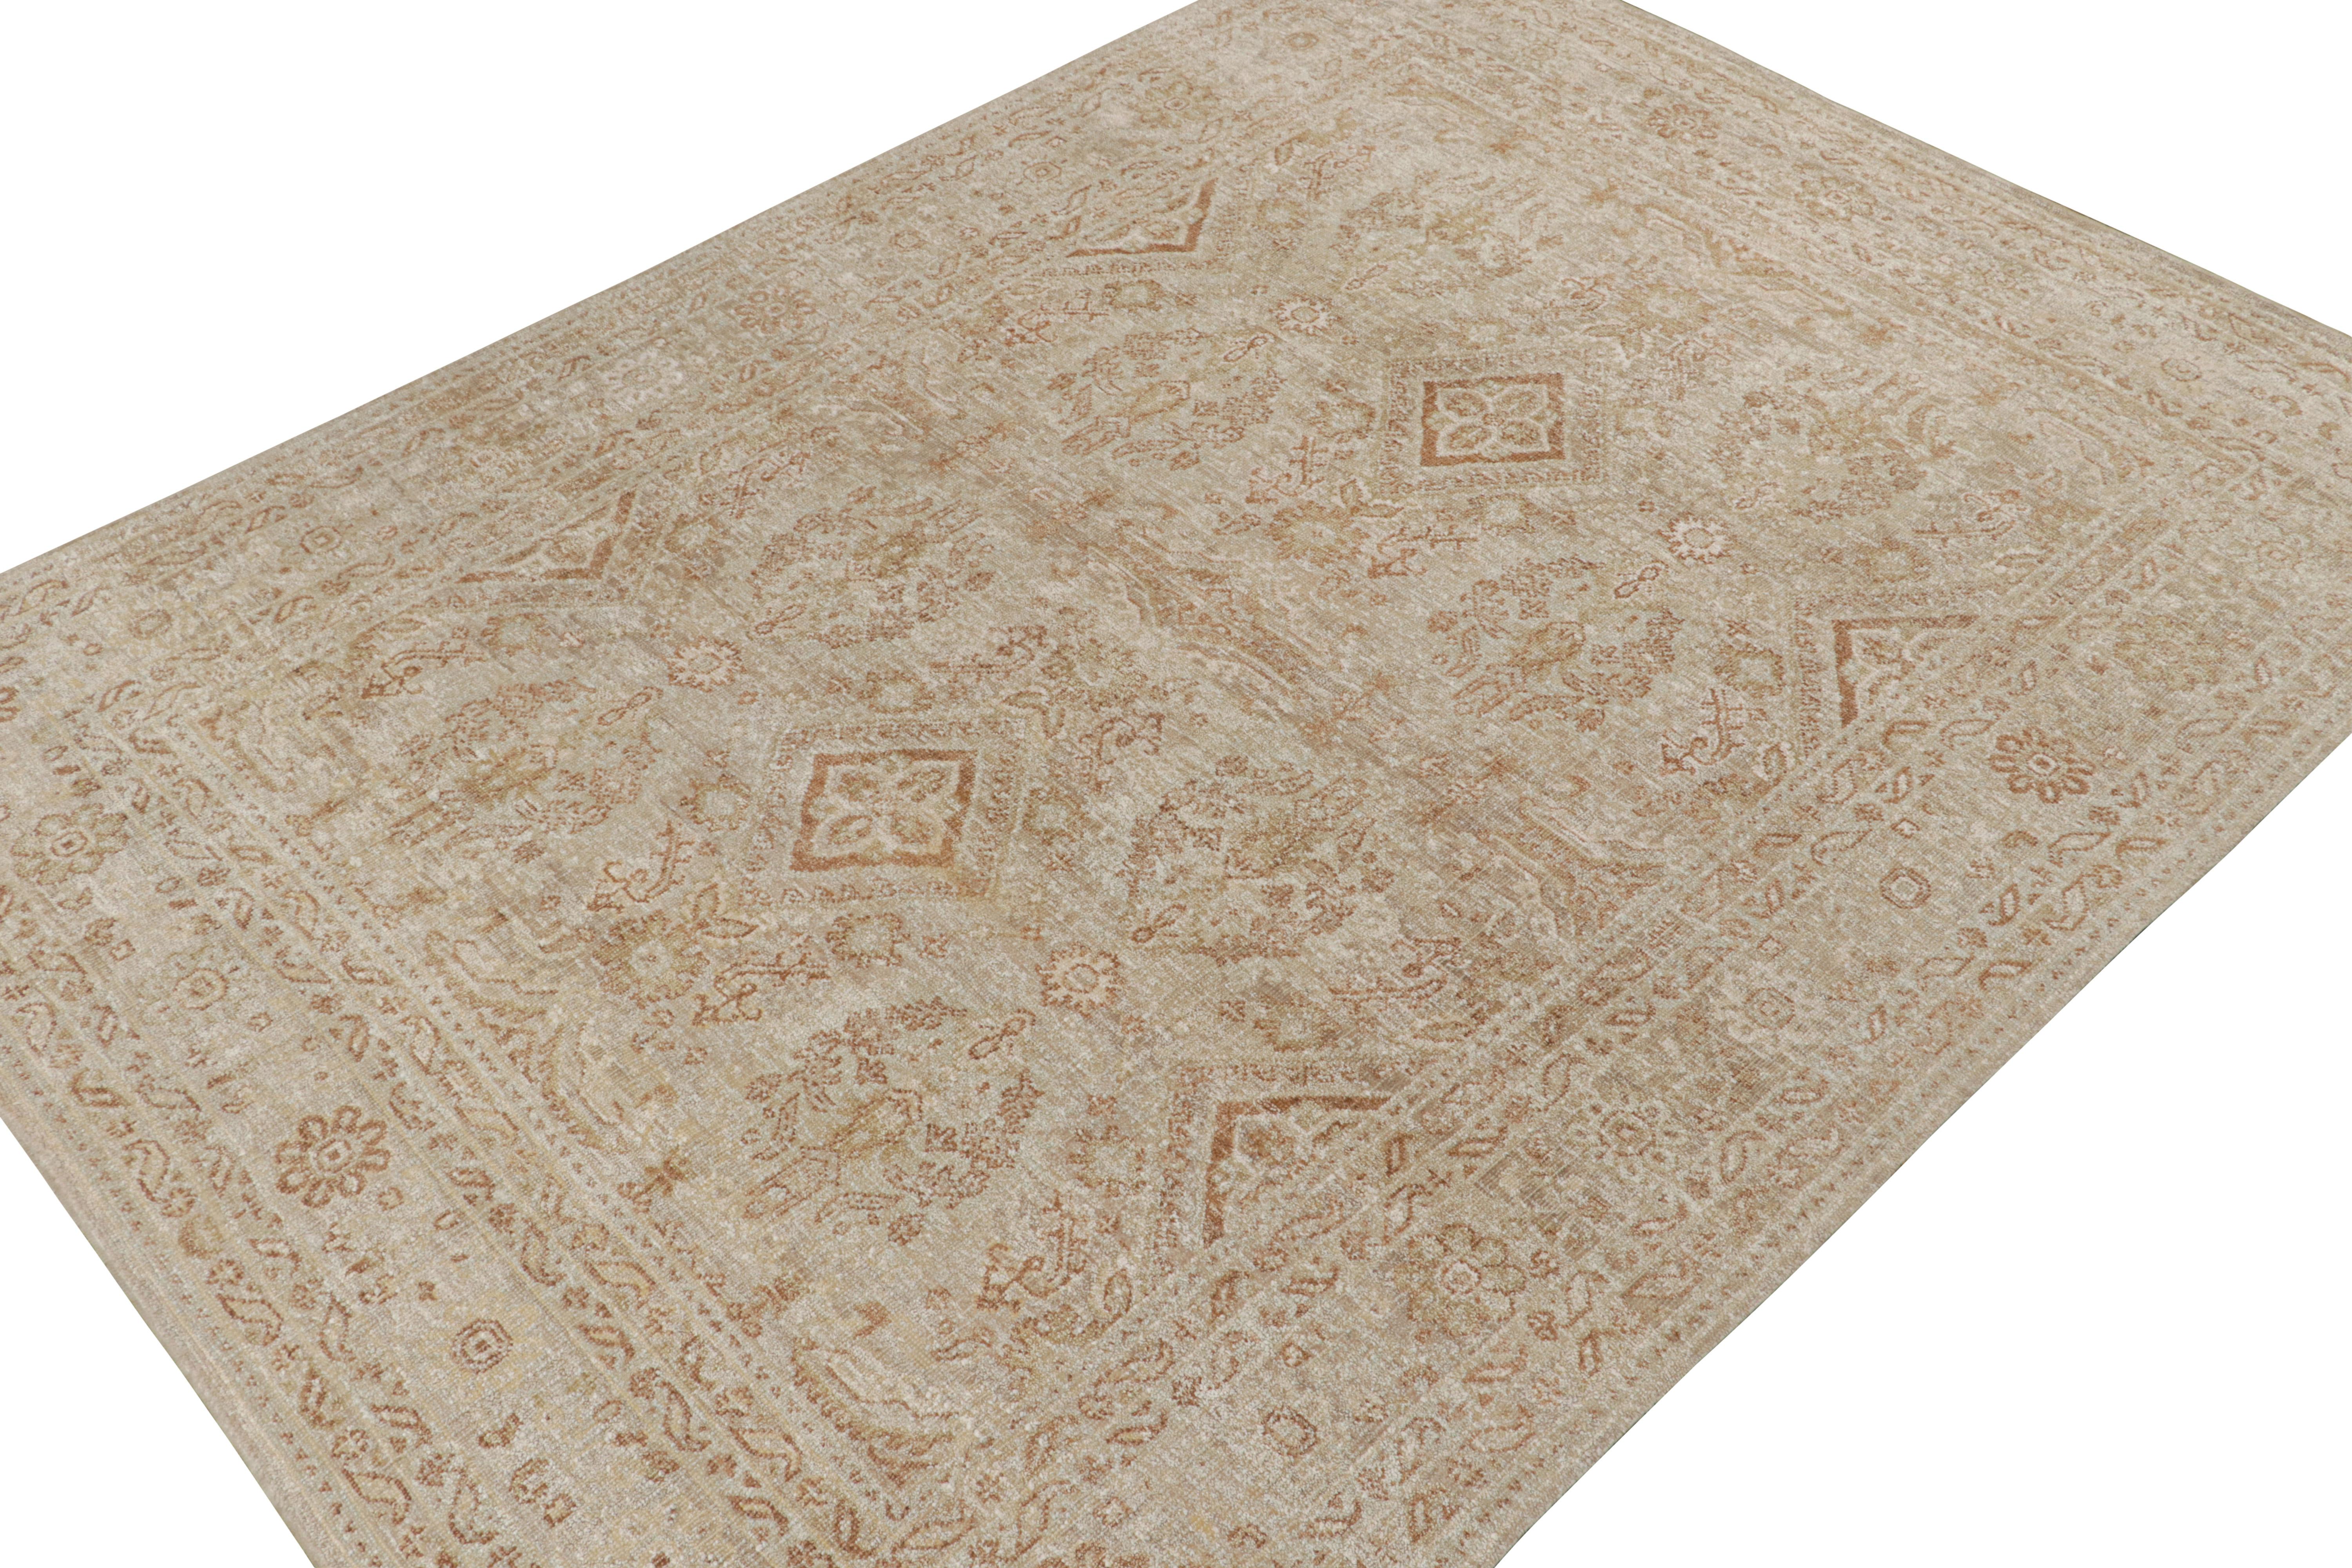 Hand-Knotted Rug & Kilim’s Oushak Style Rug in Beige-Brown & White Geometric Patterns For Sale